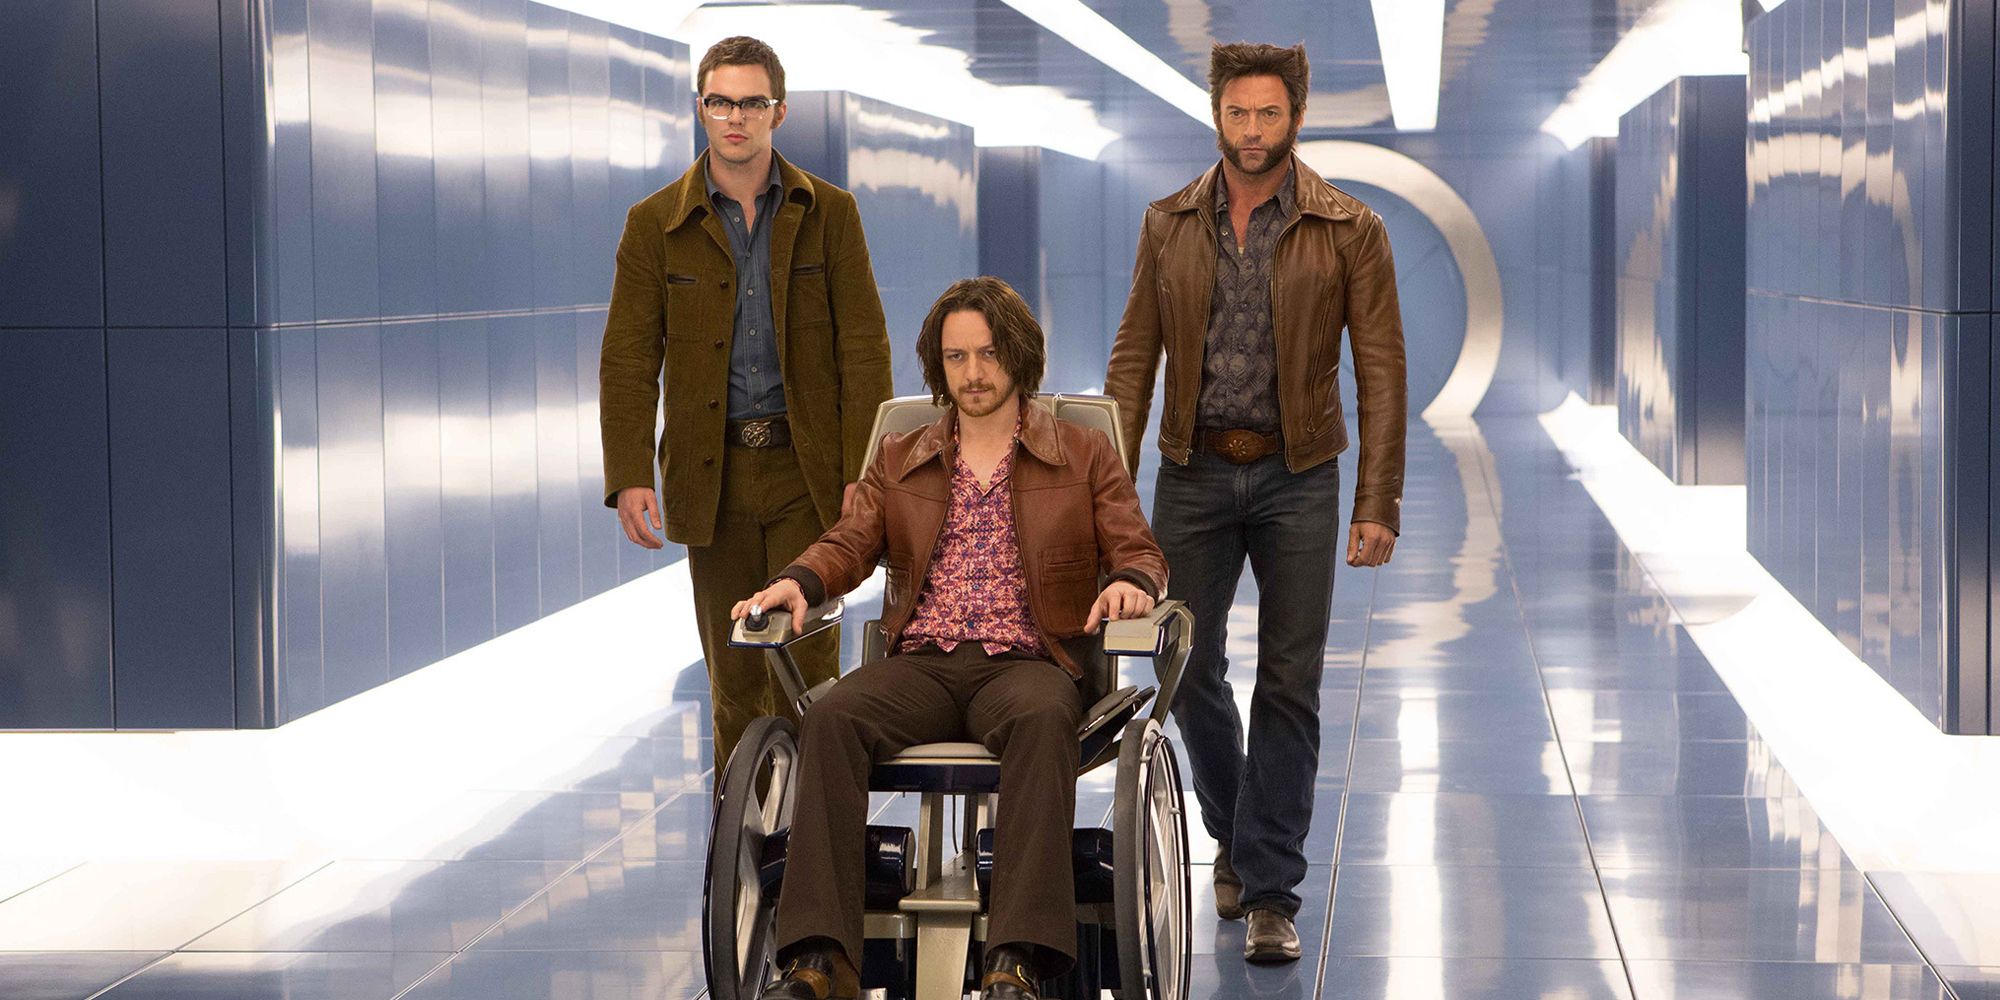 Charles Xavier (James McAvoy), Beast (Nicholas Hoult), and Wolverine (Hugh Jackman) coming down a hallway, looking serious in X Men: Days of Future Past